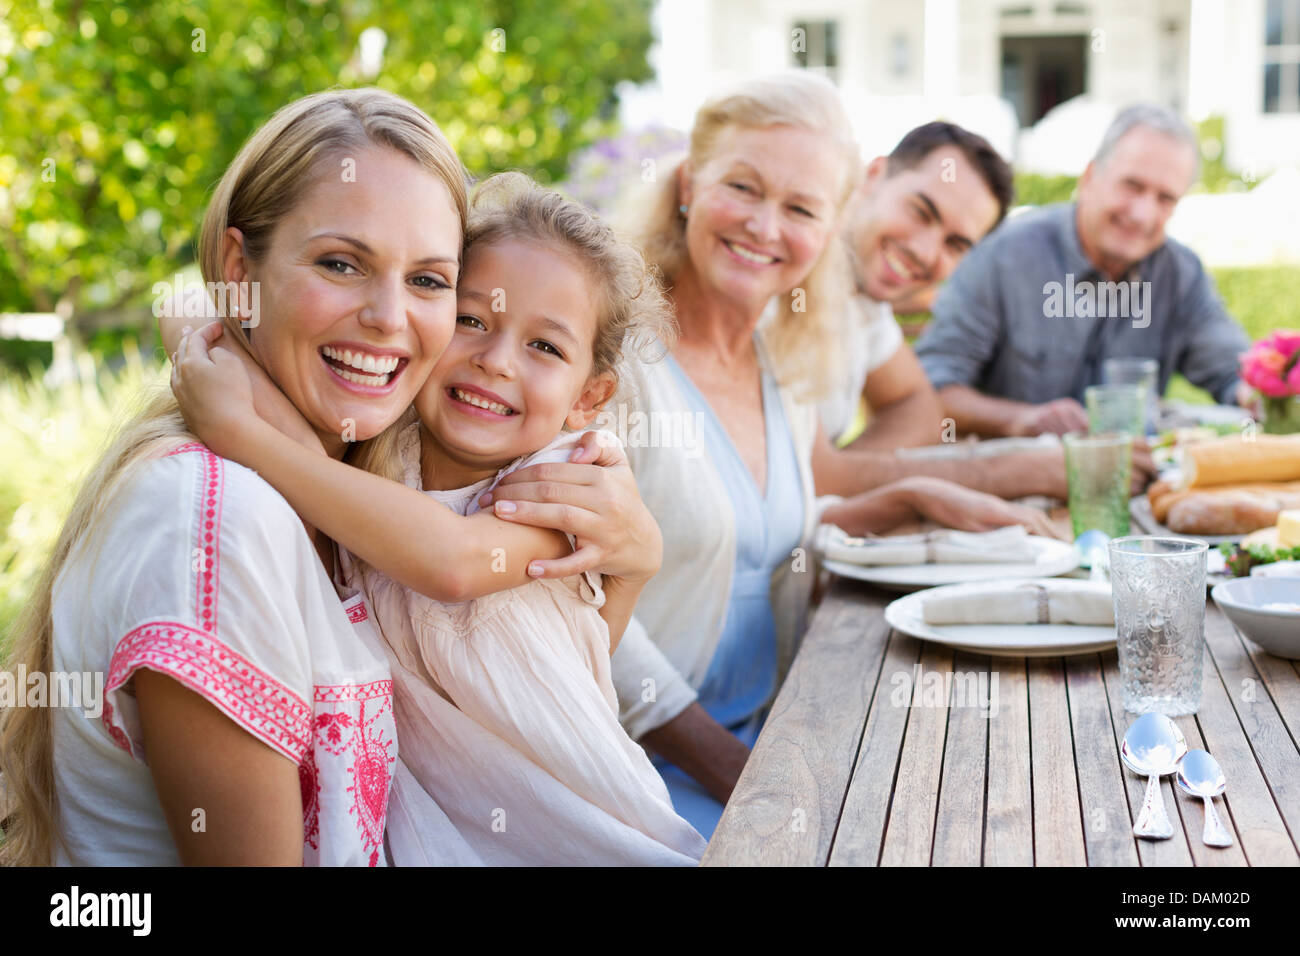 Mother and Daughter hugging at table outdoors Banque D'Images